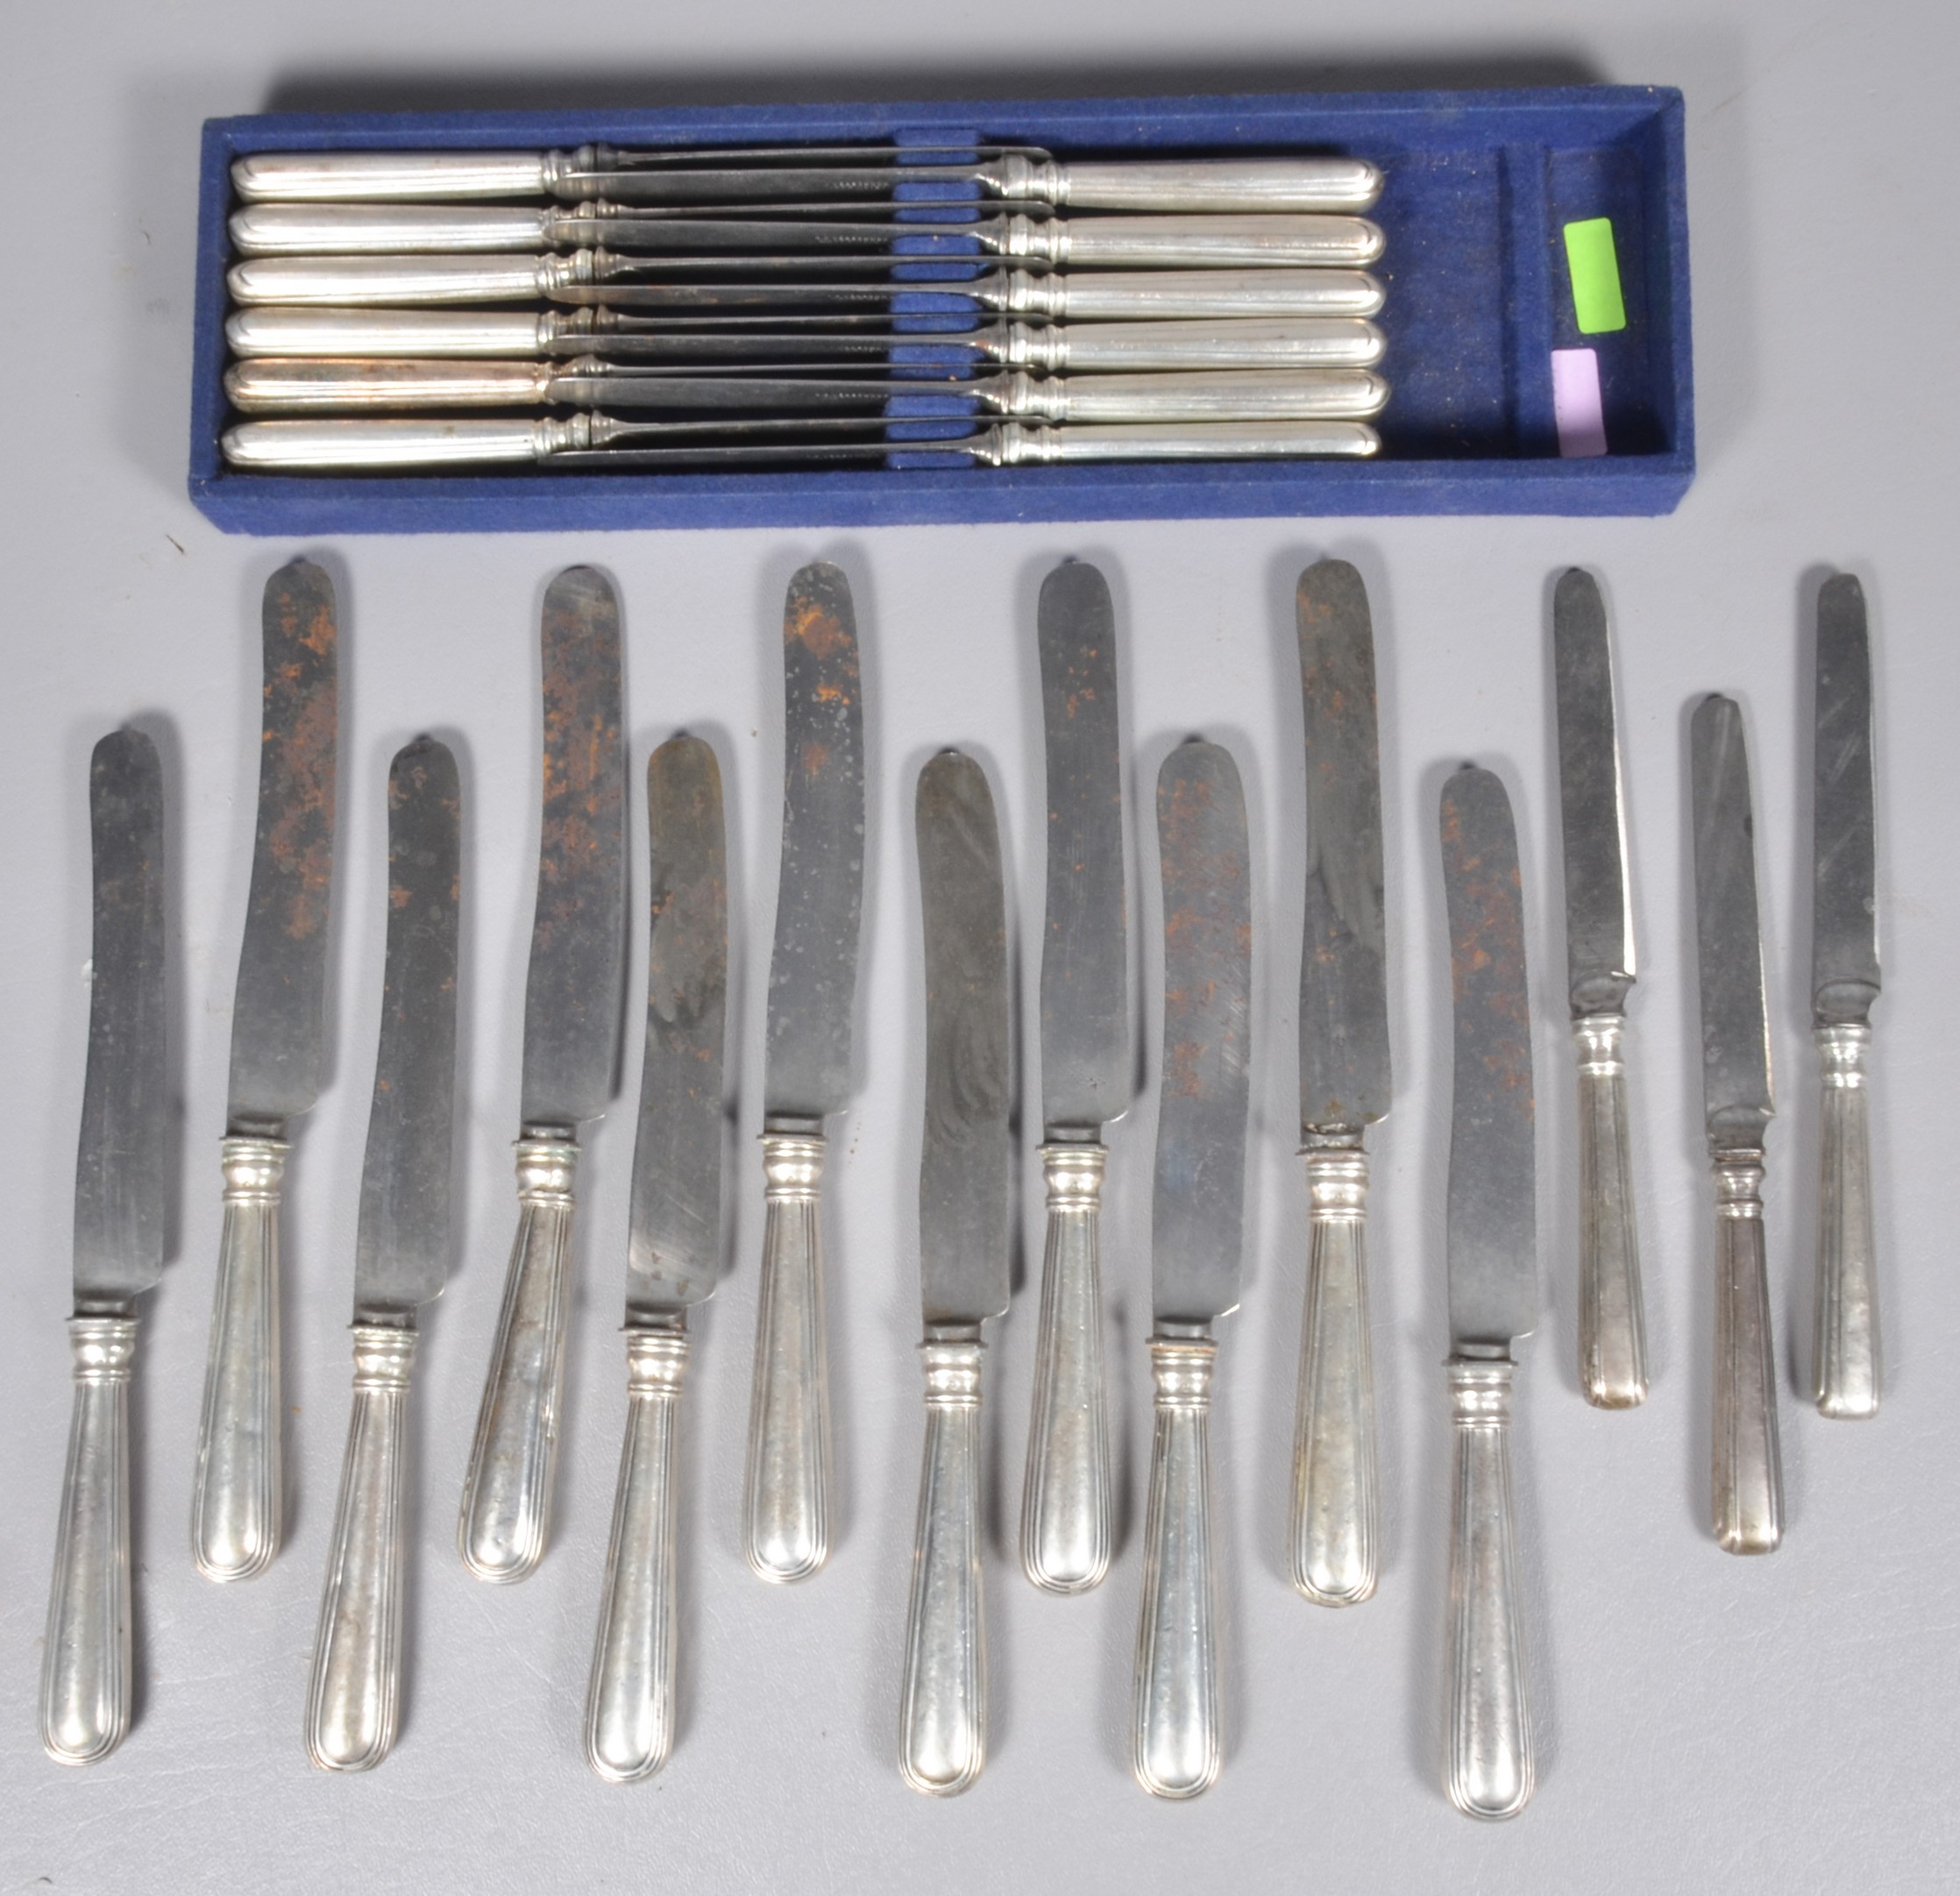  26 Sterling handled table knives 3b688f